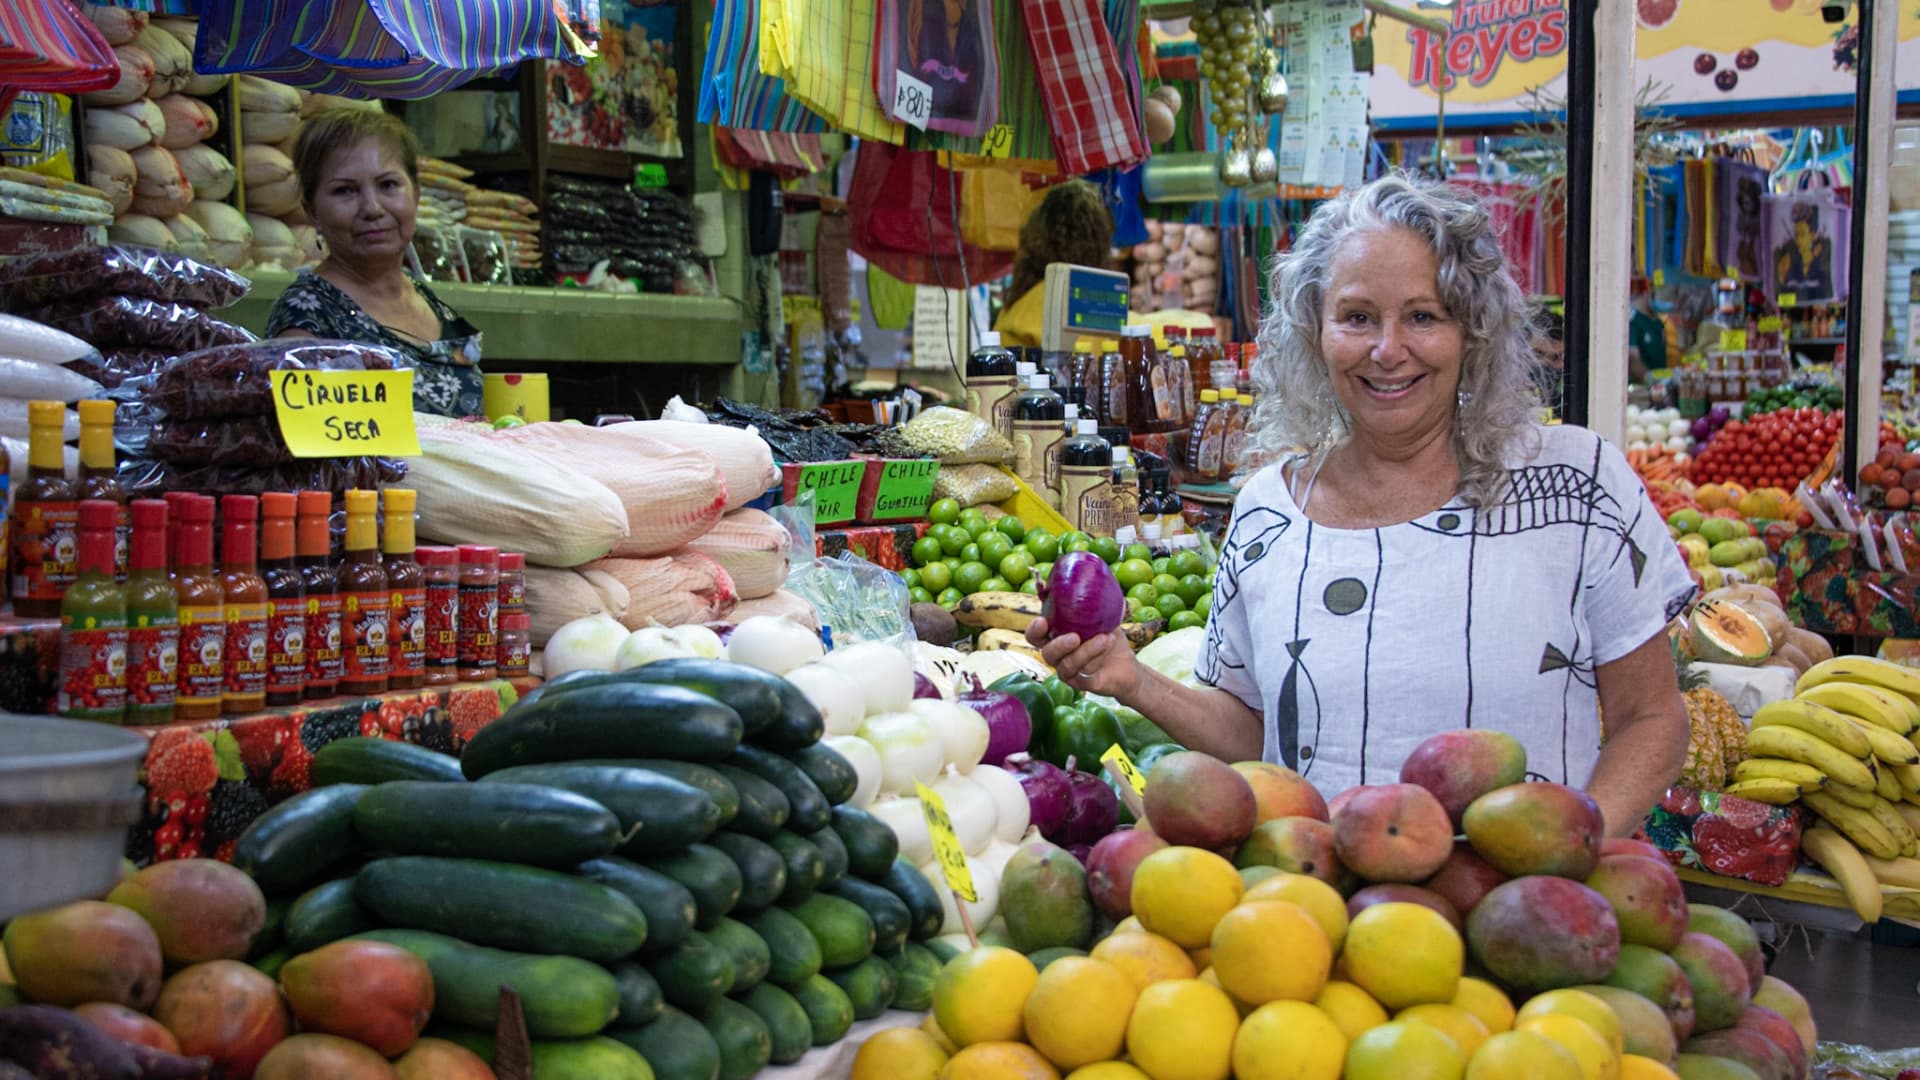 Shopping for fresh produce in the local market is a fun and inexpensive way to stock your pantry. Practice Spanish and get to know the local community!